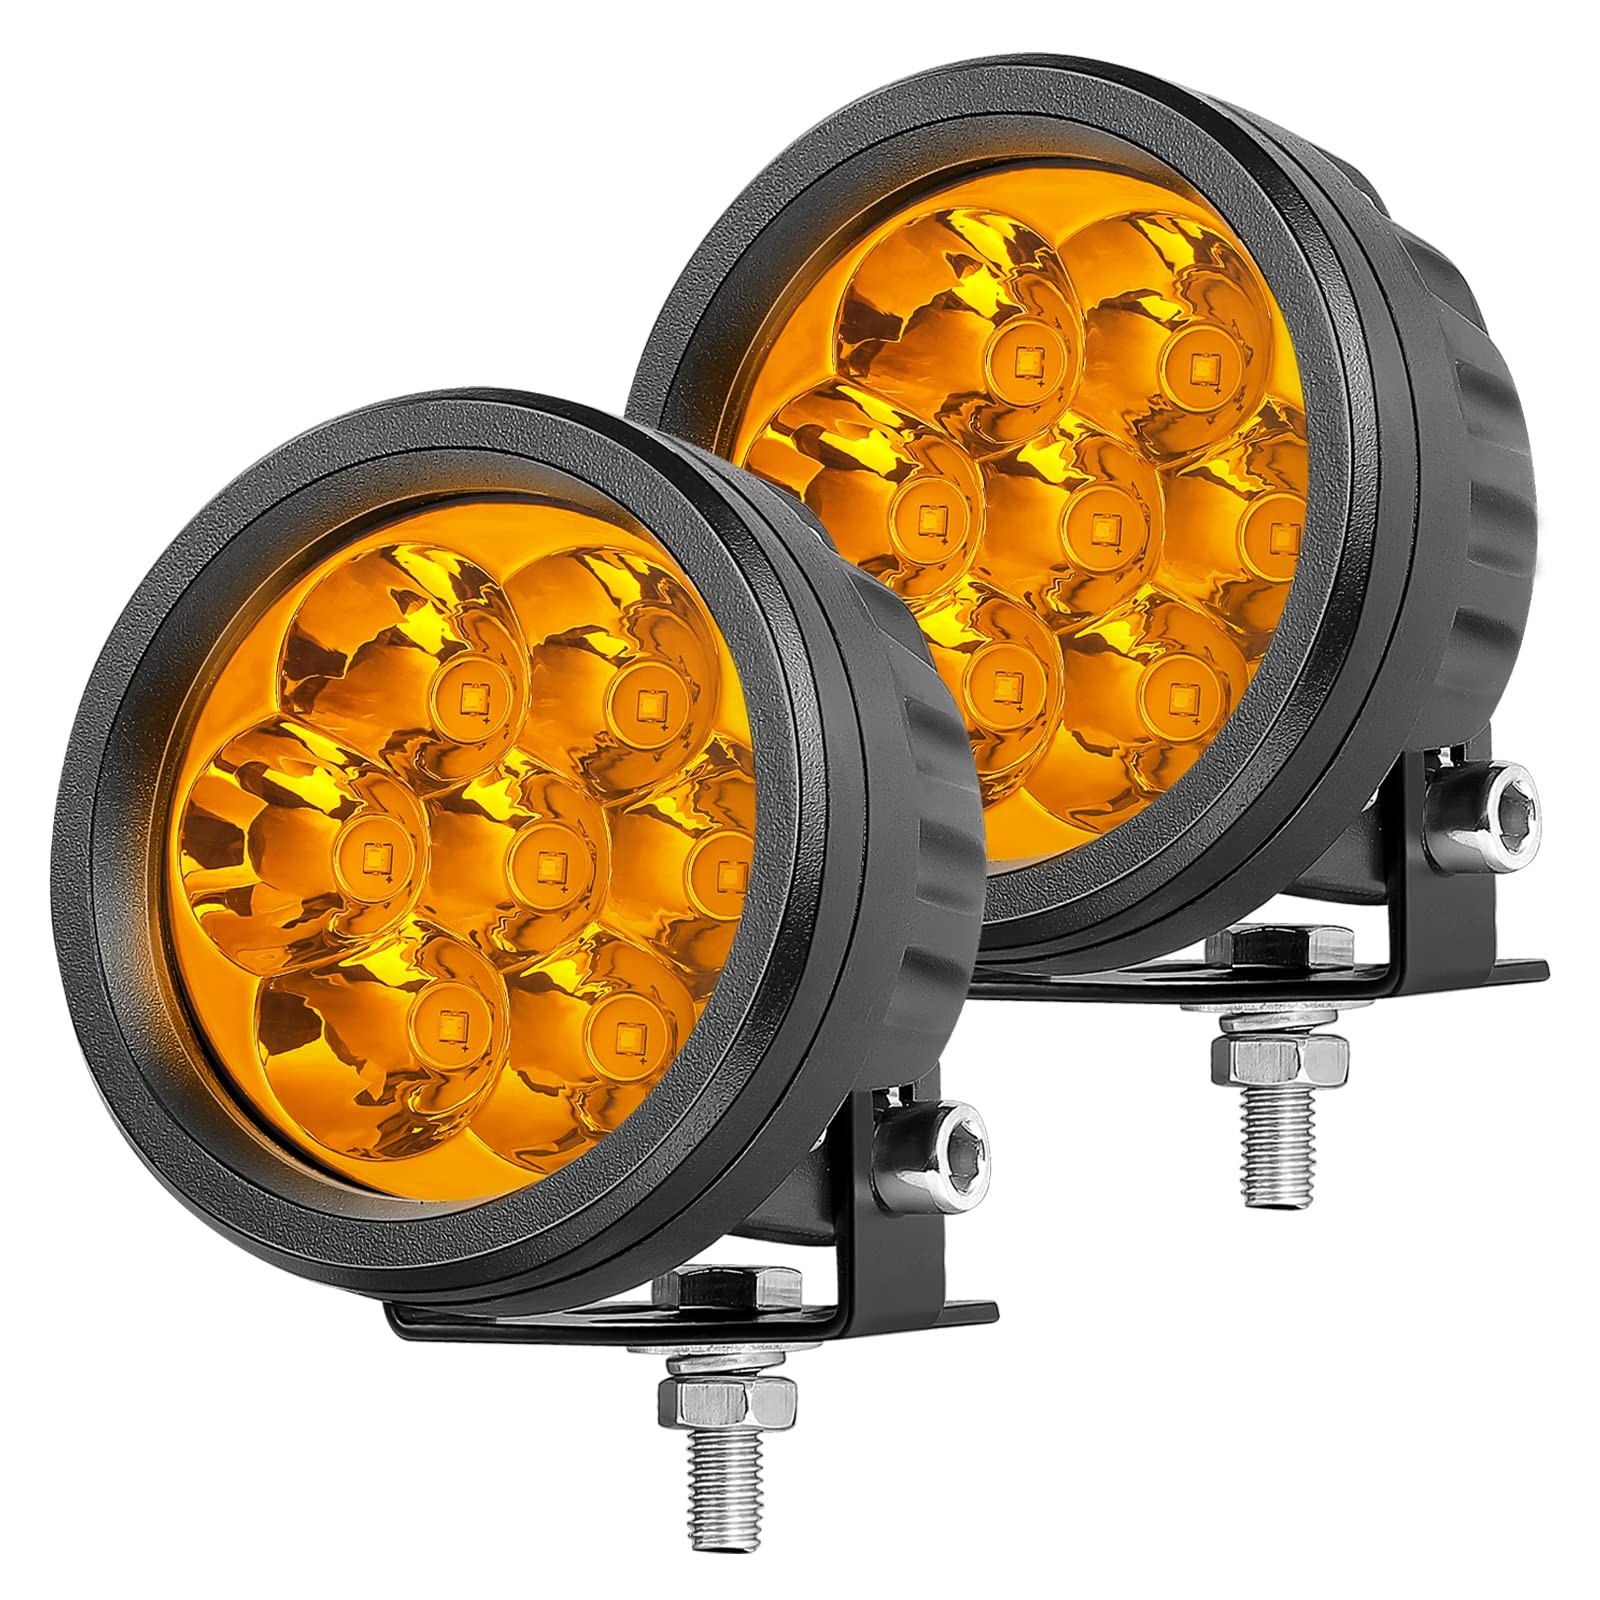 OFFROADTOWN 3.5Inch 80W Amber Round LED Lights 2PCS Offroad Driving Lights LED Fog Light LED Pods Light Round LED Work Lights for Truck Pickup SUV ATV UTV Boat 4x4 Car Motorcycle 